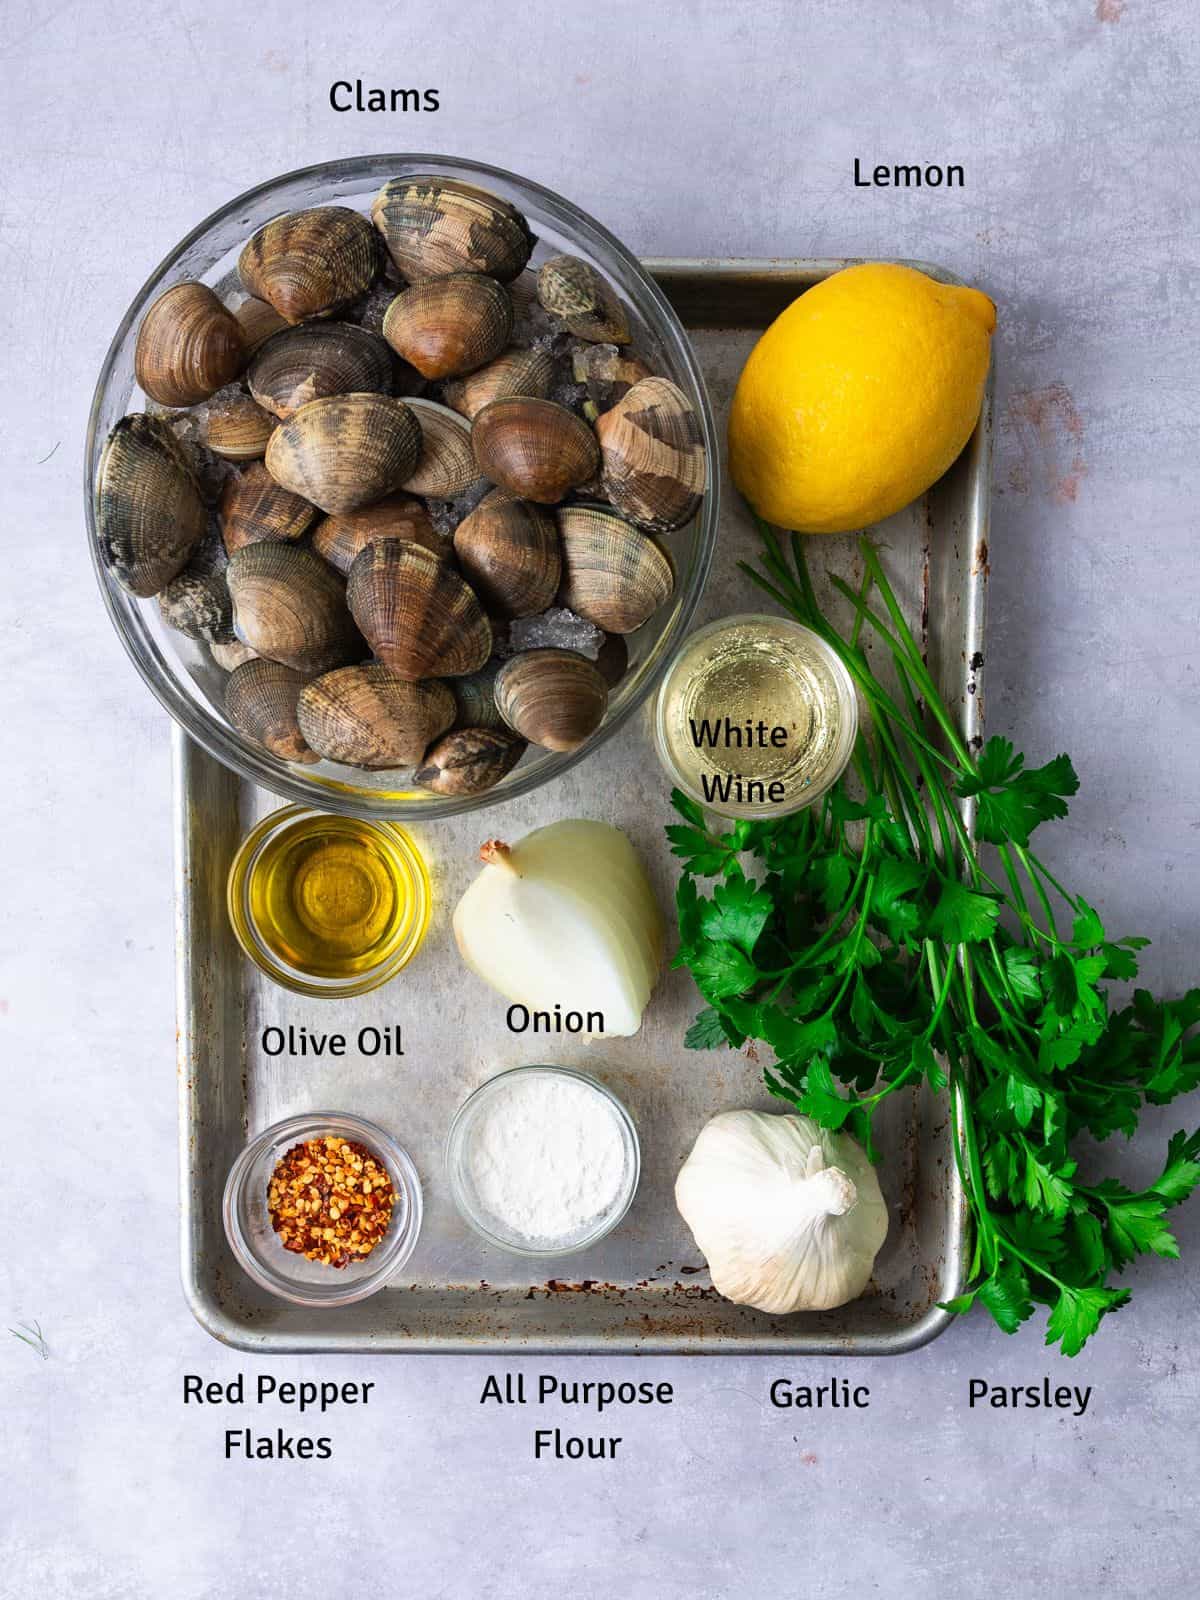 Ingredients for almejas en salsa verde, aka Spanish steamed clams in green sauce with fresh lemon, white wine and garlic.